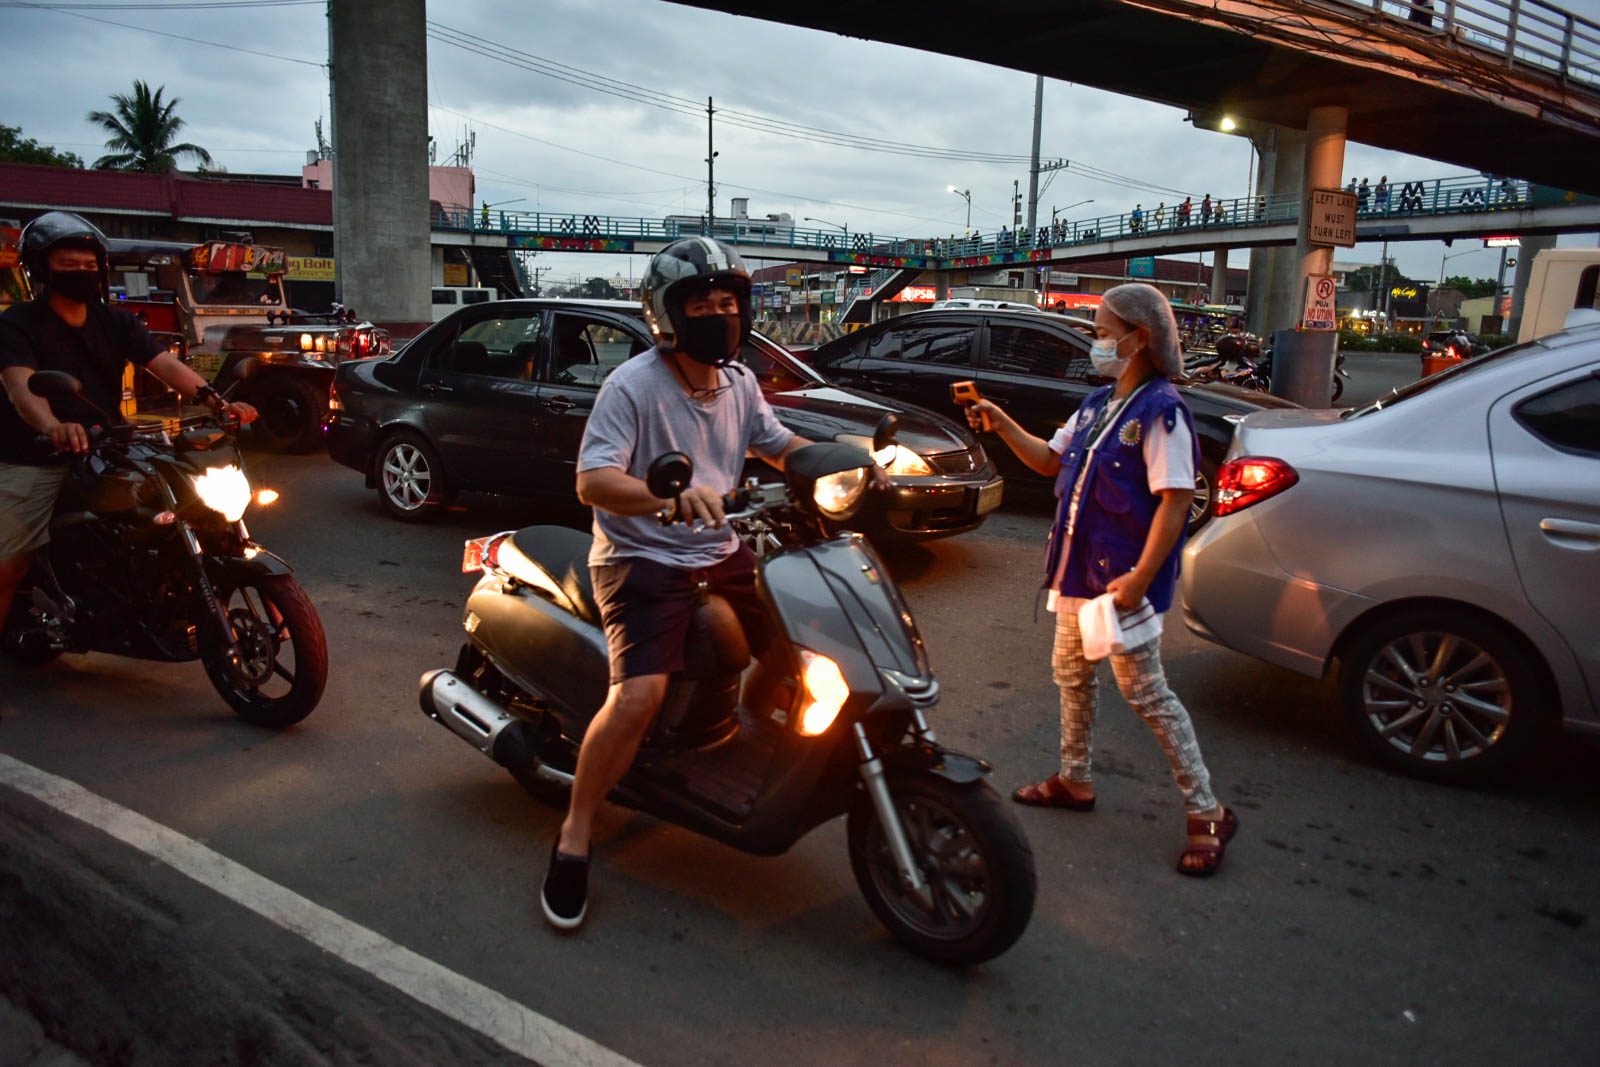 TEMPERATURE CHECK. Barangay health worker Jocelyn Landero checks the temperature of motorcycle riders along Marcos Highway on March 16, 2020. Photo by Rob Reyes/Rappler 